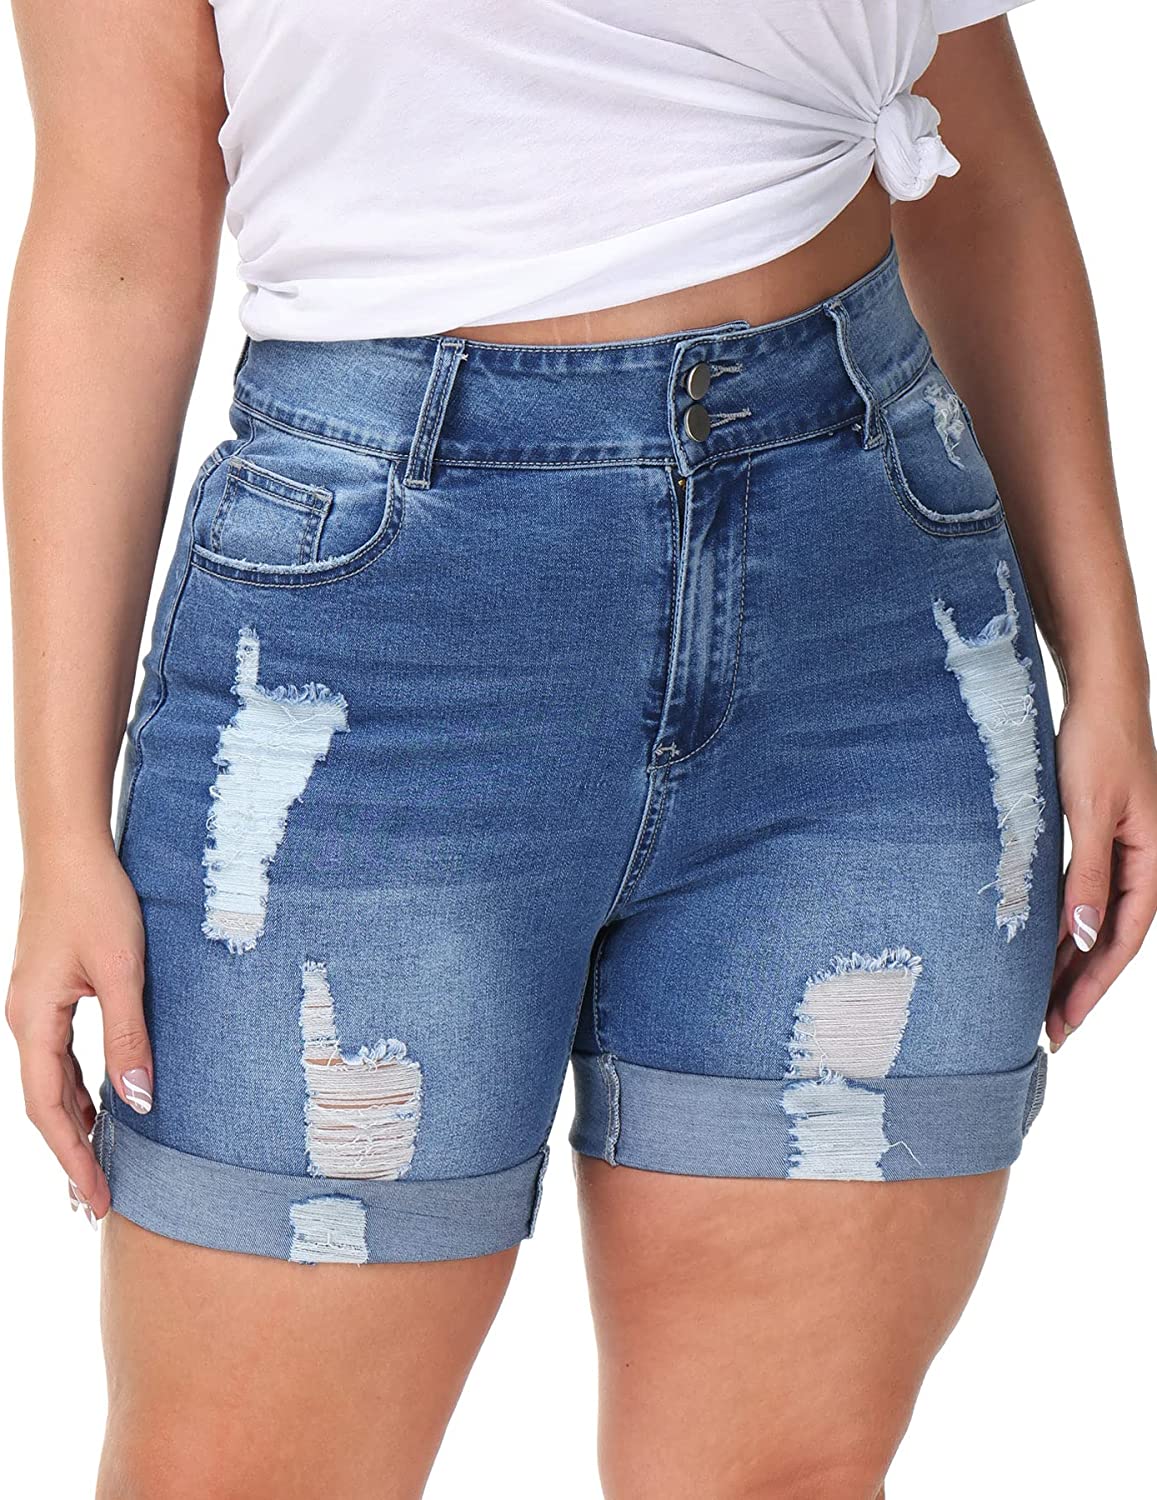 Genleck Women's Juniors Criss Crossover Jean Shorts High Waisted Stretchy  Denim Shorts Casual Summer Hot Shorts(Blue,XS-XL) at Amazon Women's  Clothing store